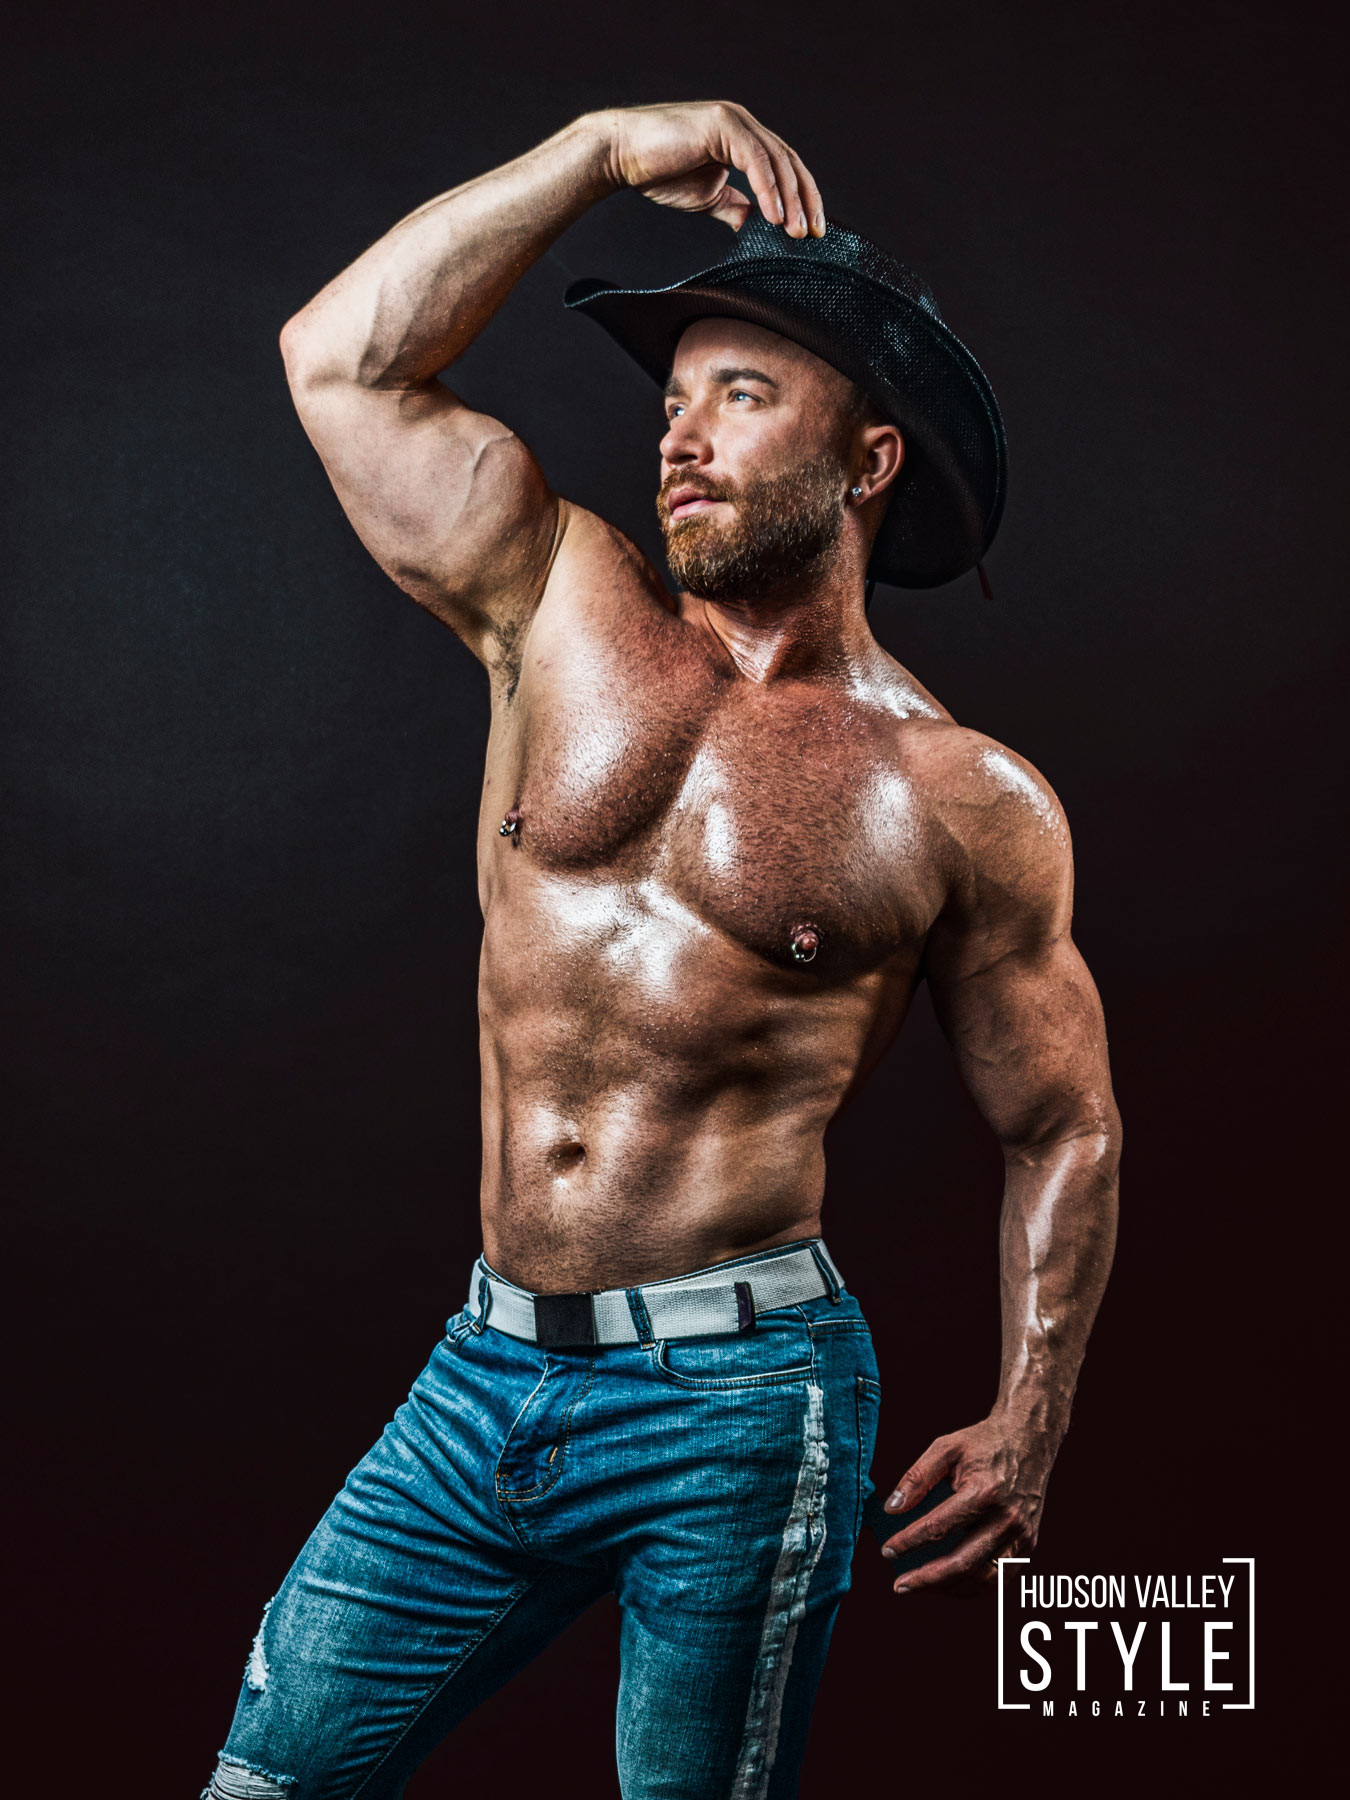 Can You Really Pull Off Wearing a Cowboy Hat? – Men's Style Product Review with Fitness Model Maxwell Alexander – Presented by HARD NEW YORK Fashion Accessories for Men